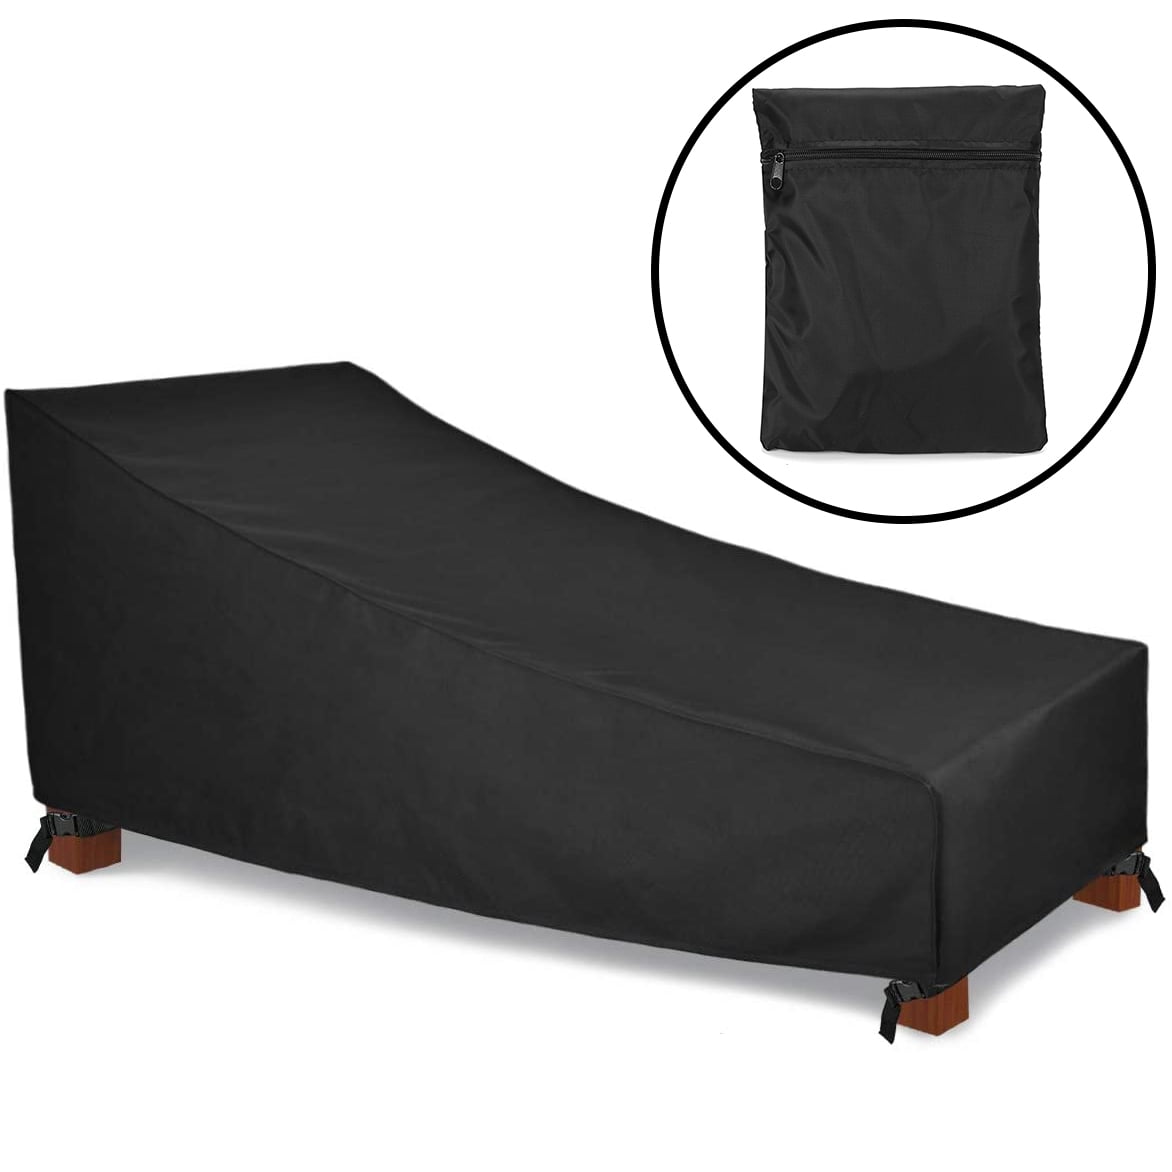 Durable Water Resistant Premium Patio Chaise Lounge Outdoor Furniture Cover 